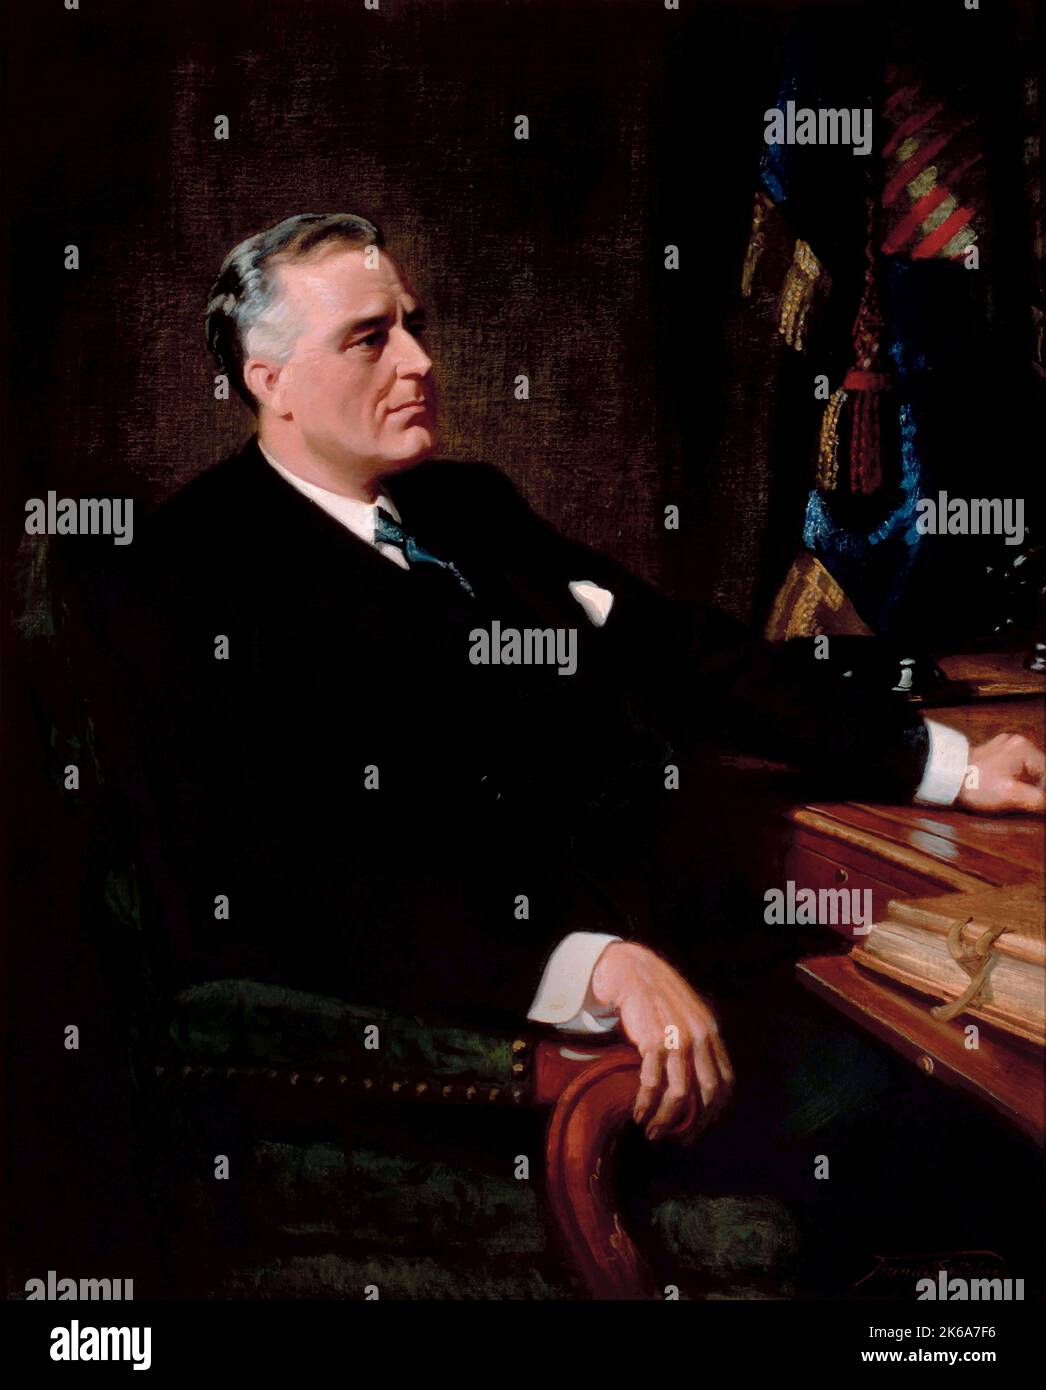 Vintage American history painting of President Franklin Roosevelt seated at a desk. Stock Photo